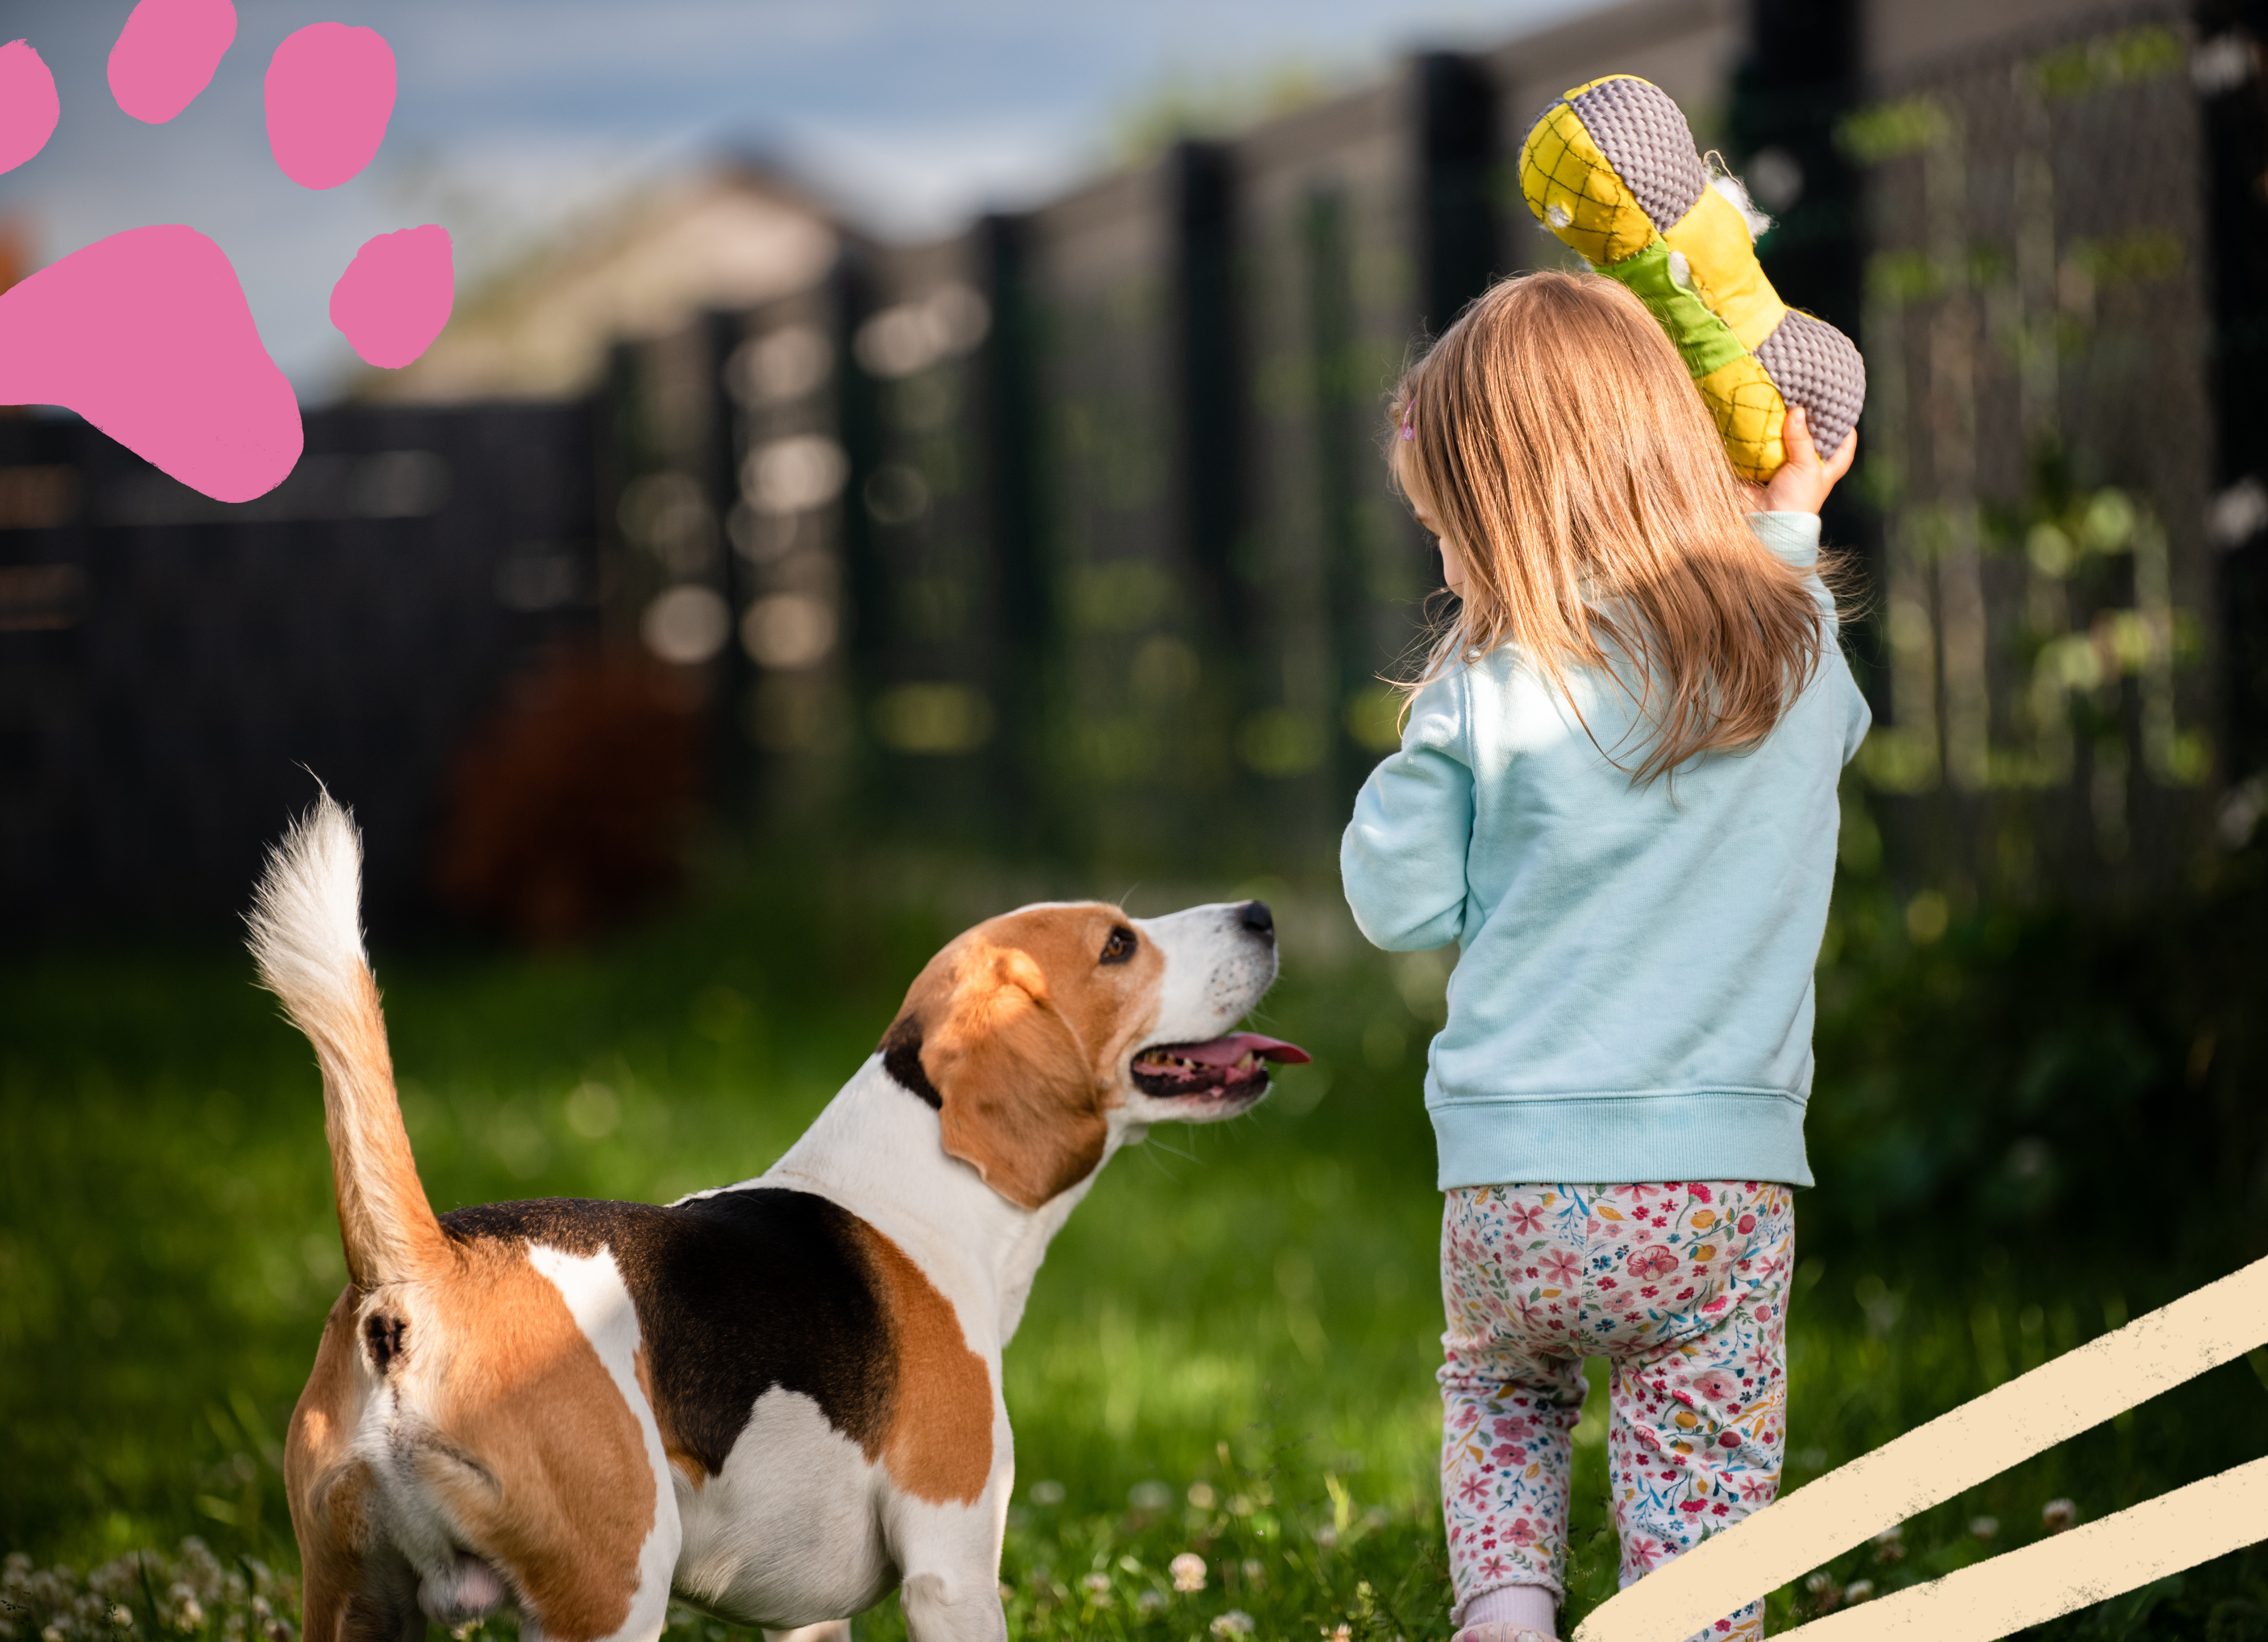 How To Foster Relationships Between Kids & Dogs